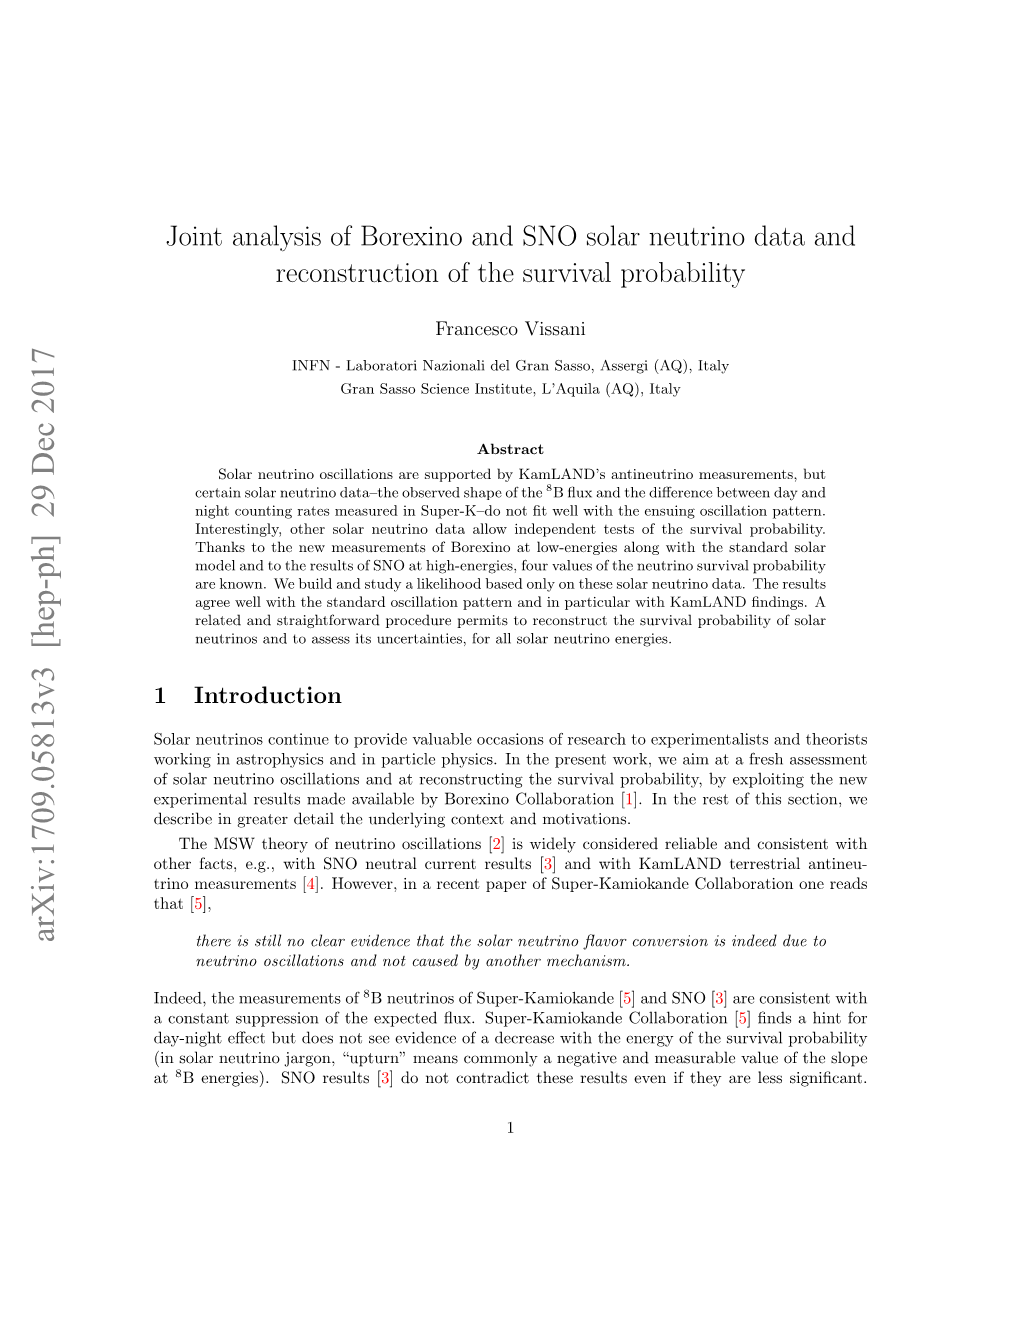 Joint Analysis of Borexino and SNO Solar Neutrino Data and Reconstruction of the Survival Probability